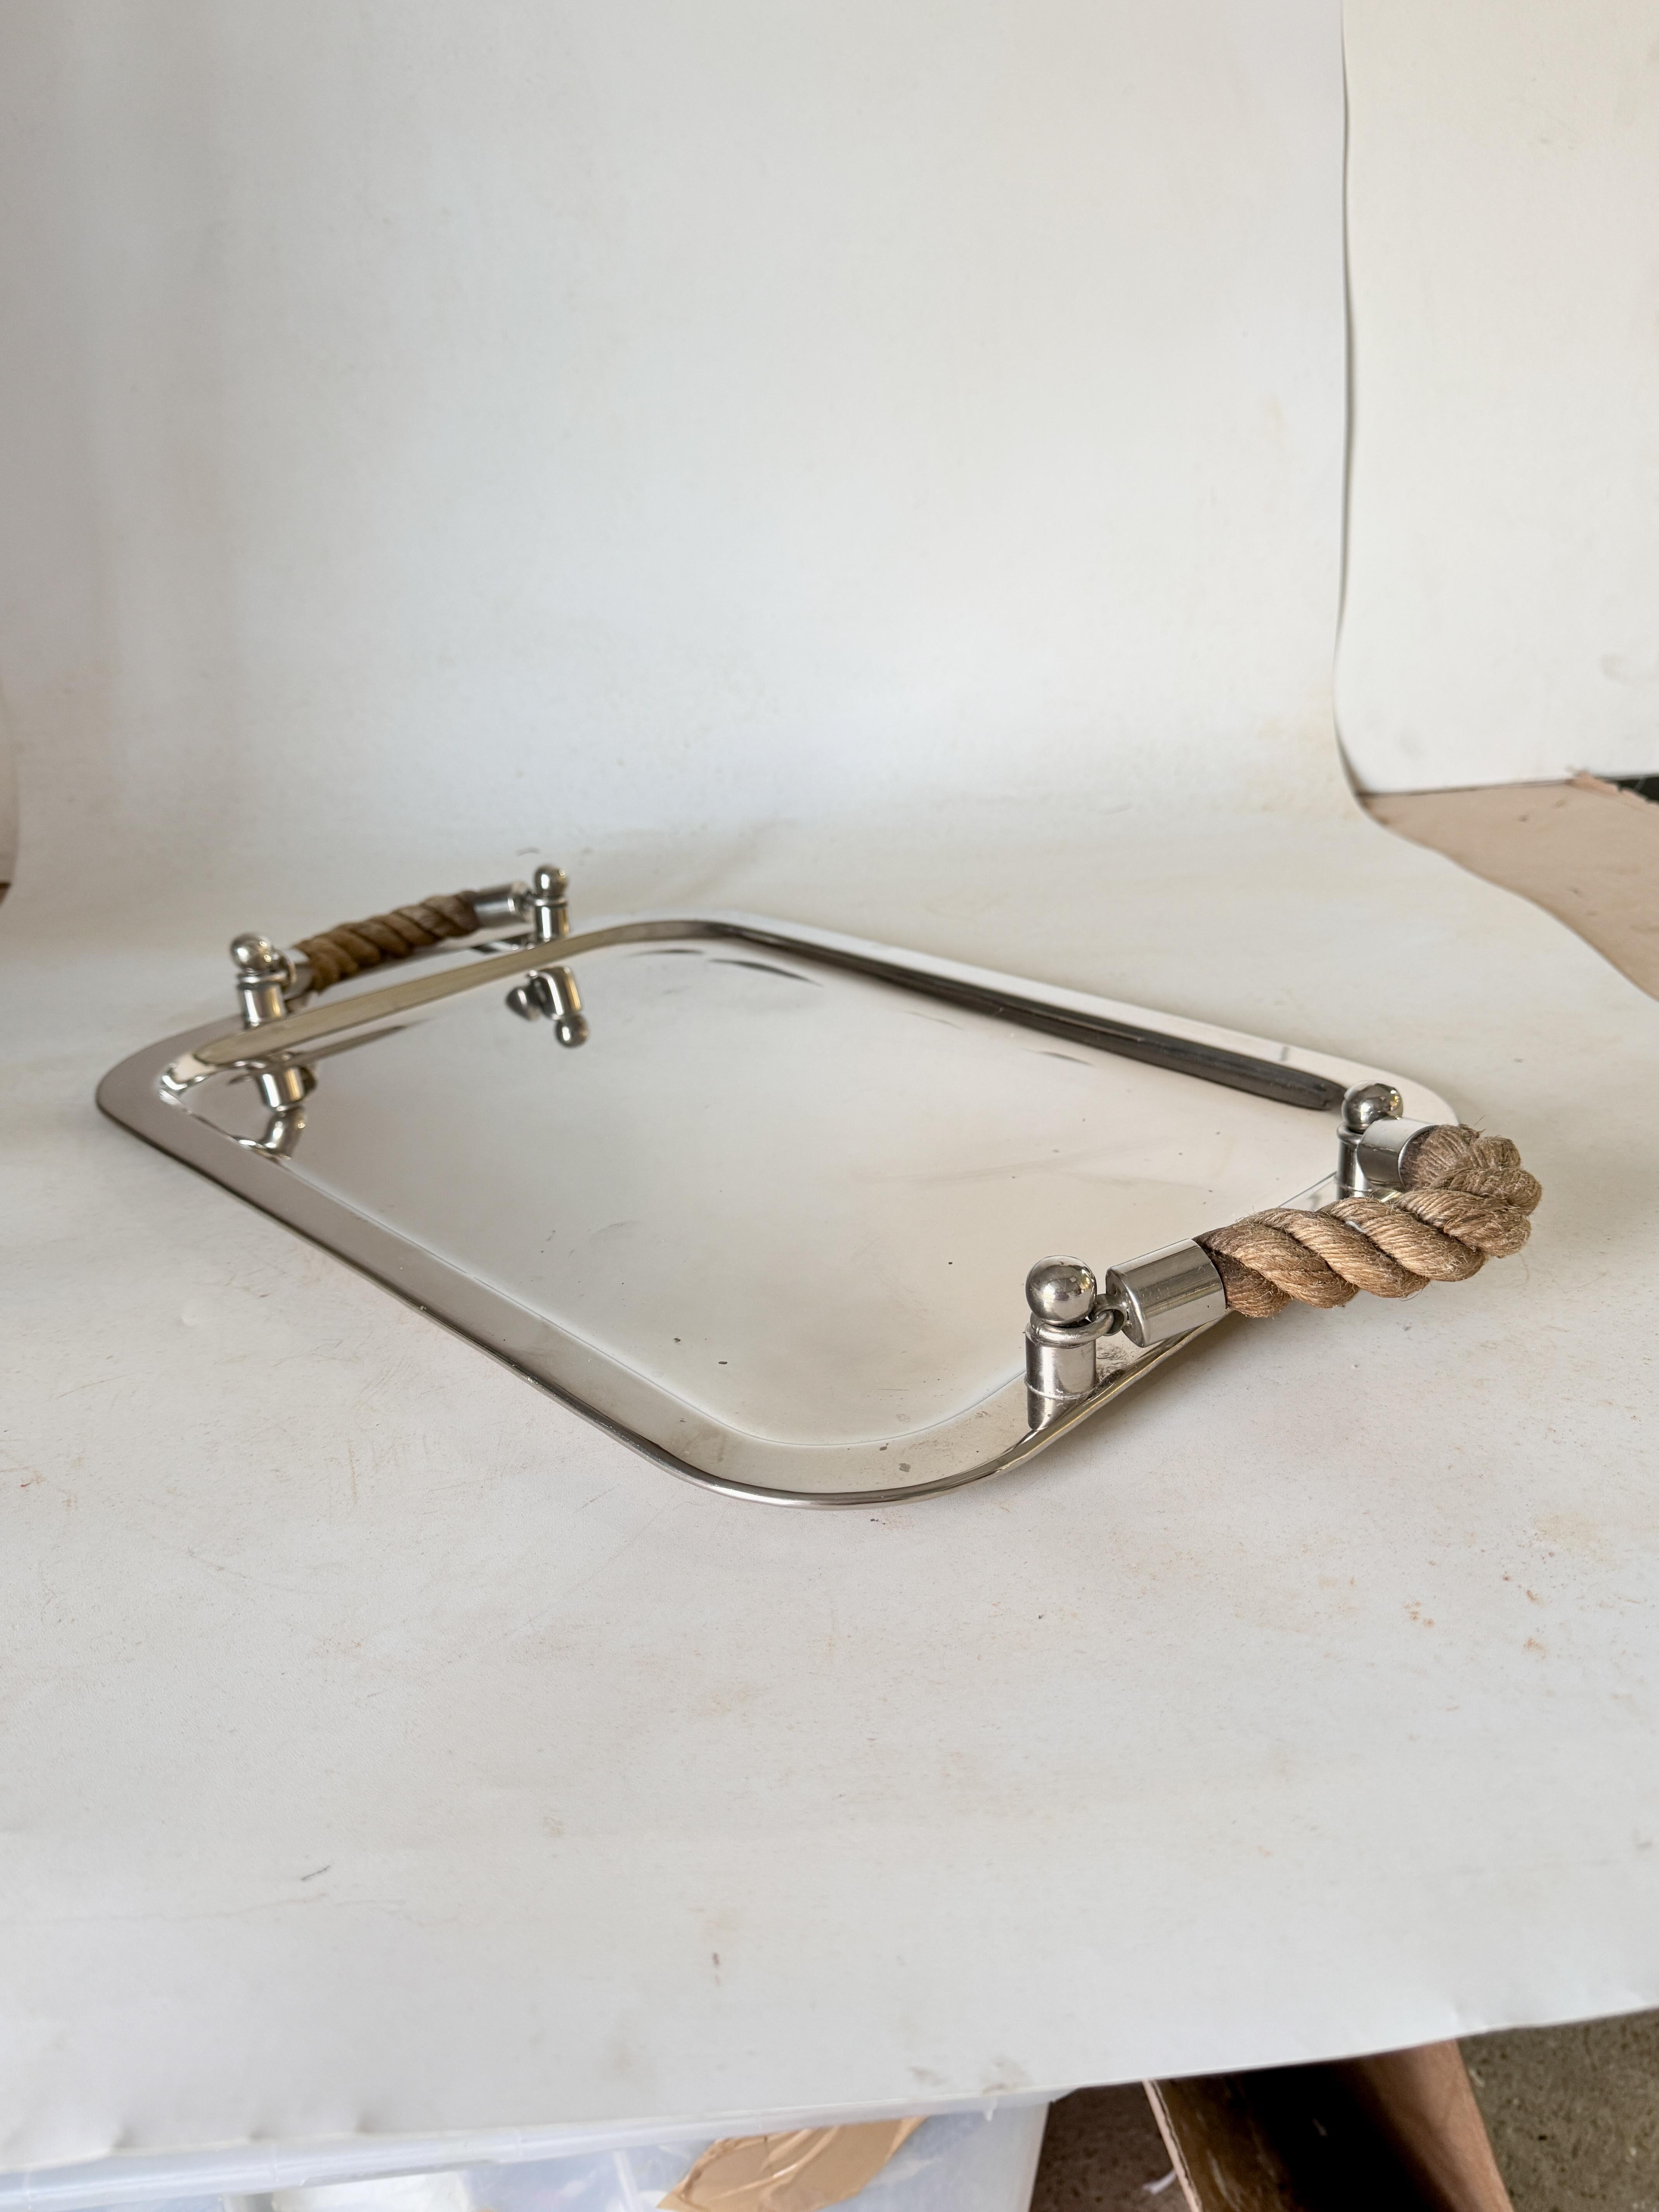 Beautiful High Quality Chrome tray with its Handles in Rope. It is Silver in color and dates from the 1970s. It is a Platter that was made in Italy with very good manufacturing quality.
Boat Atmosphere, Yachting Style.